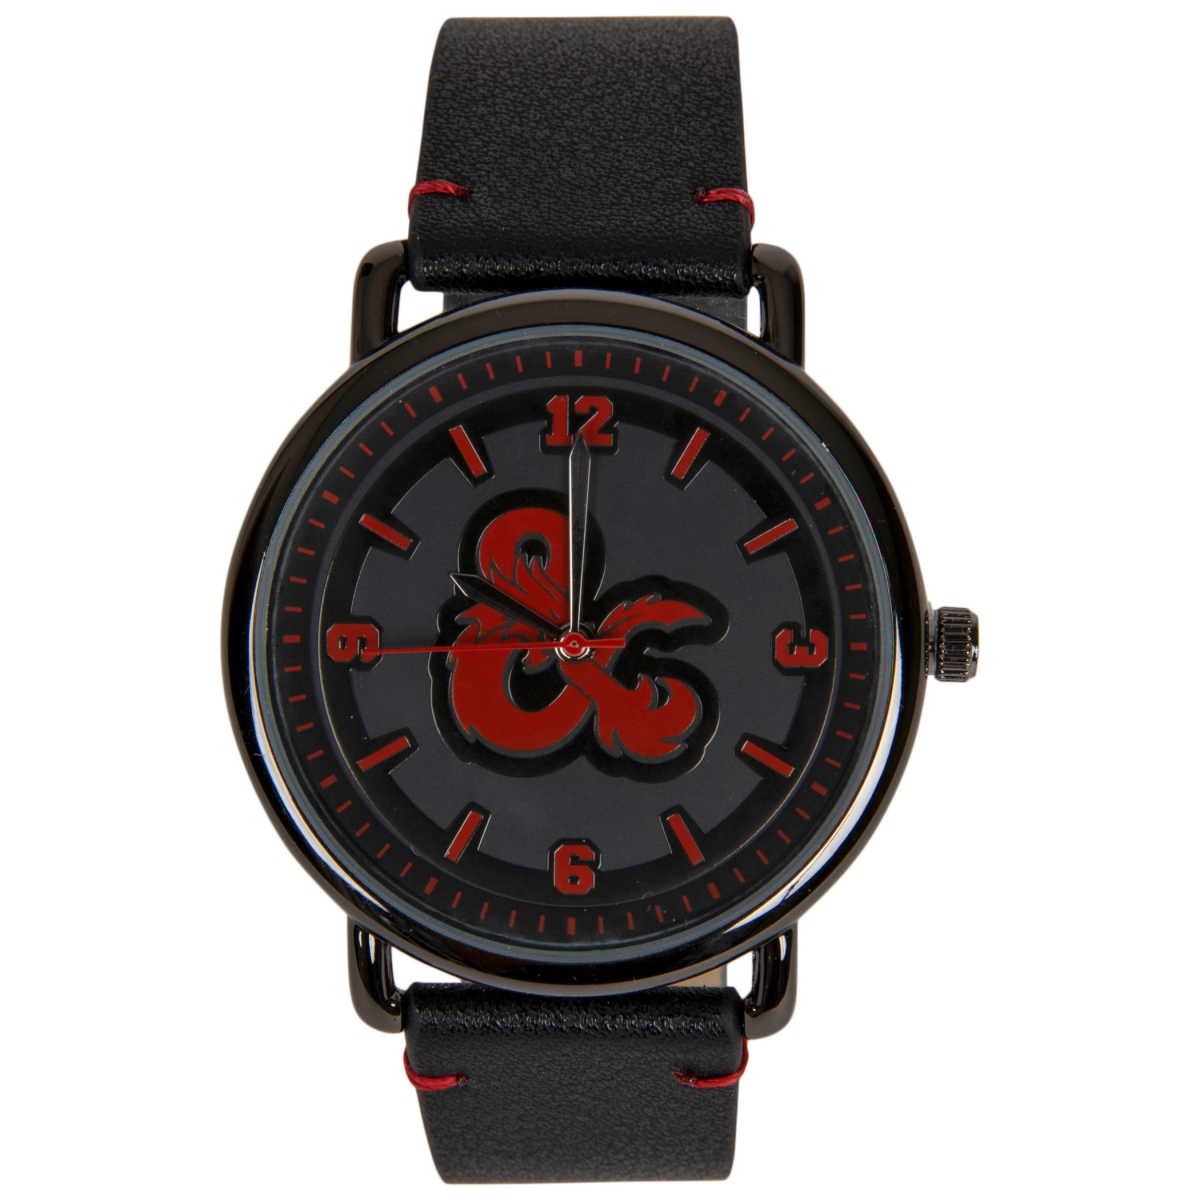 Dungeons & Dragons 838020 Dungeons & Dragons Etched Symbol Face Analog Wrist Watch